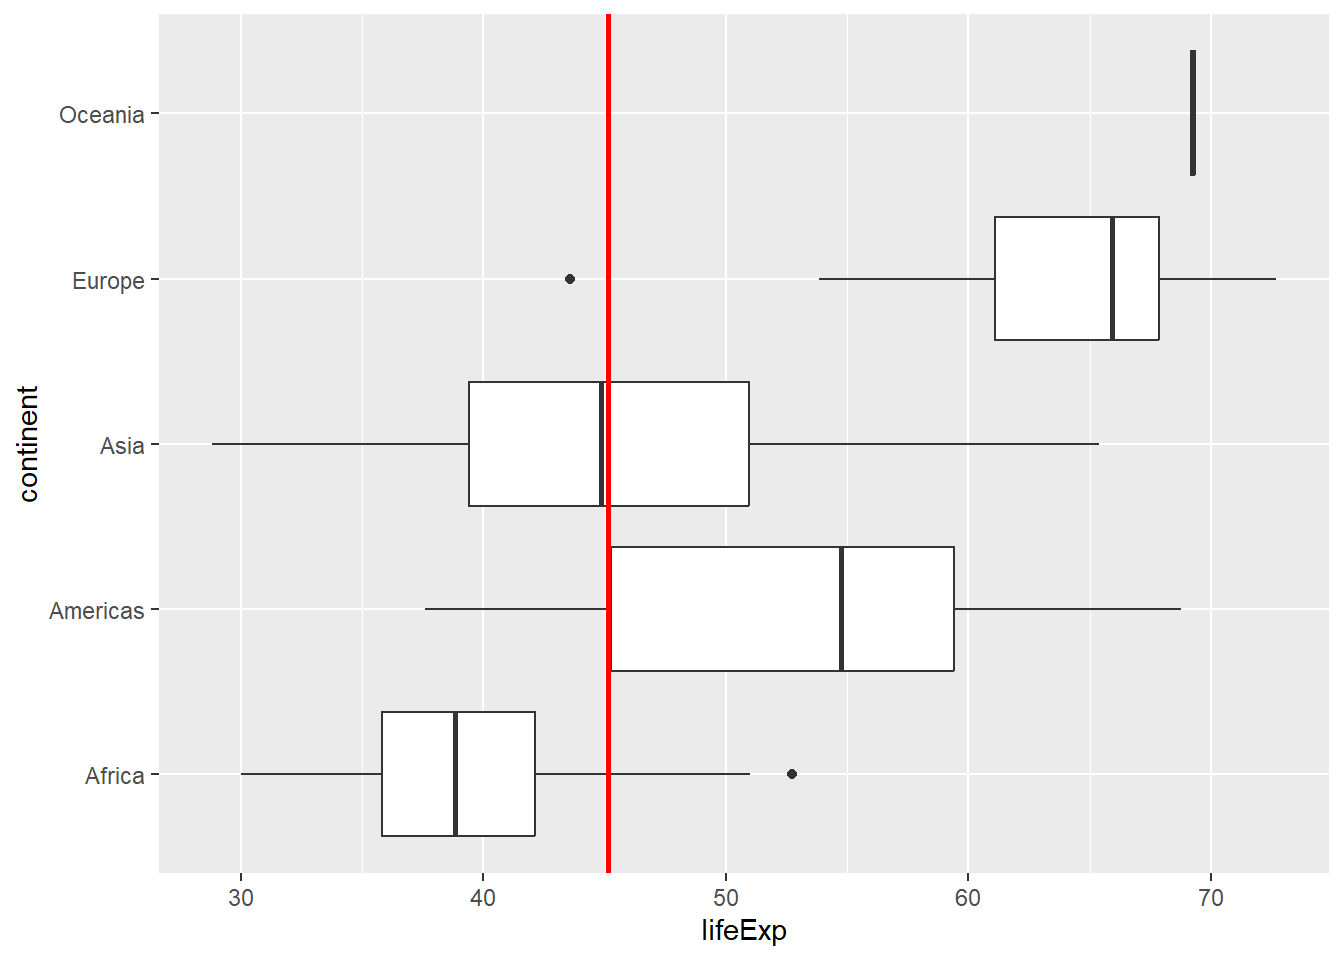 A boxplot of life expectancy values by continent for 1952.  We have a red line marking where the median life expectancy is for that year.